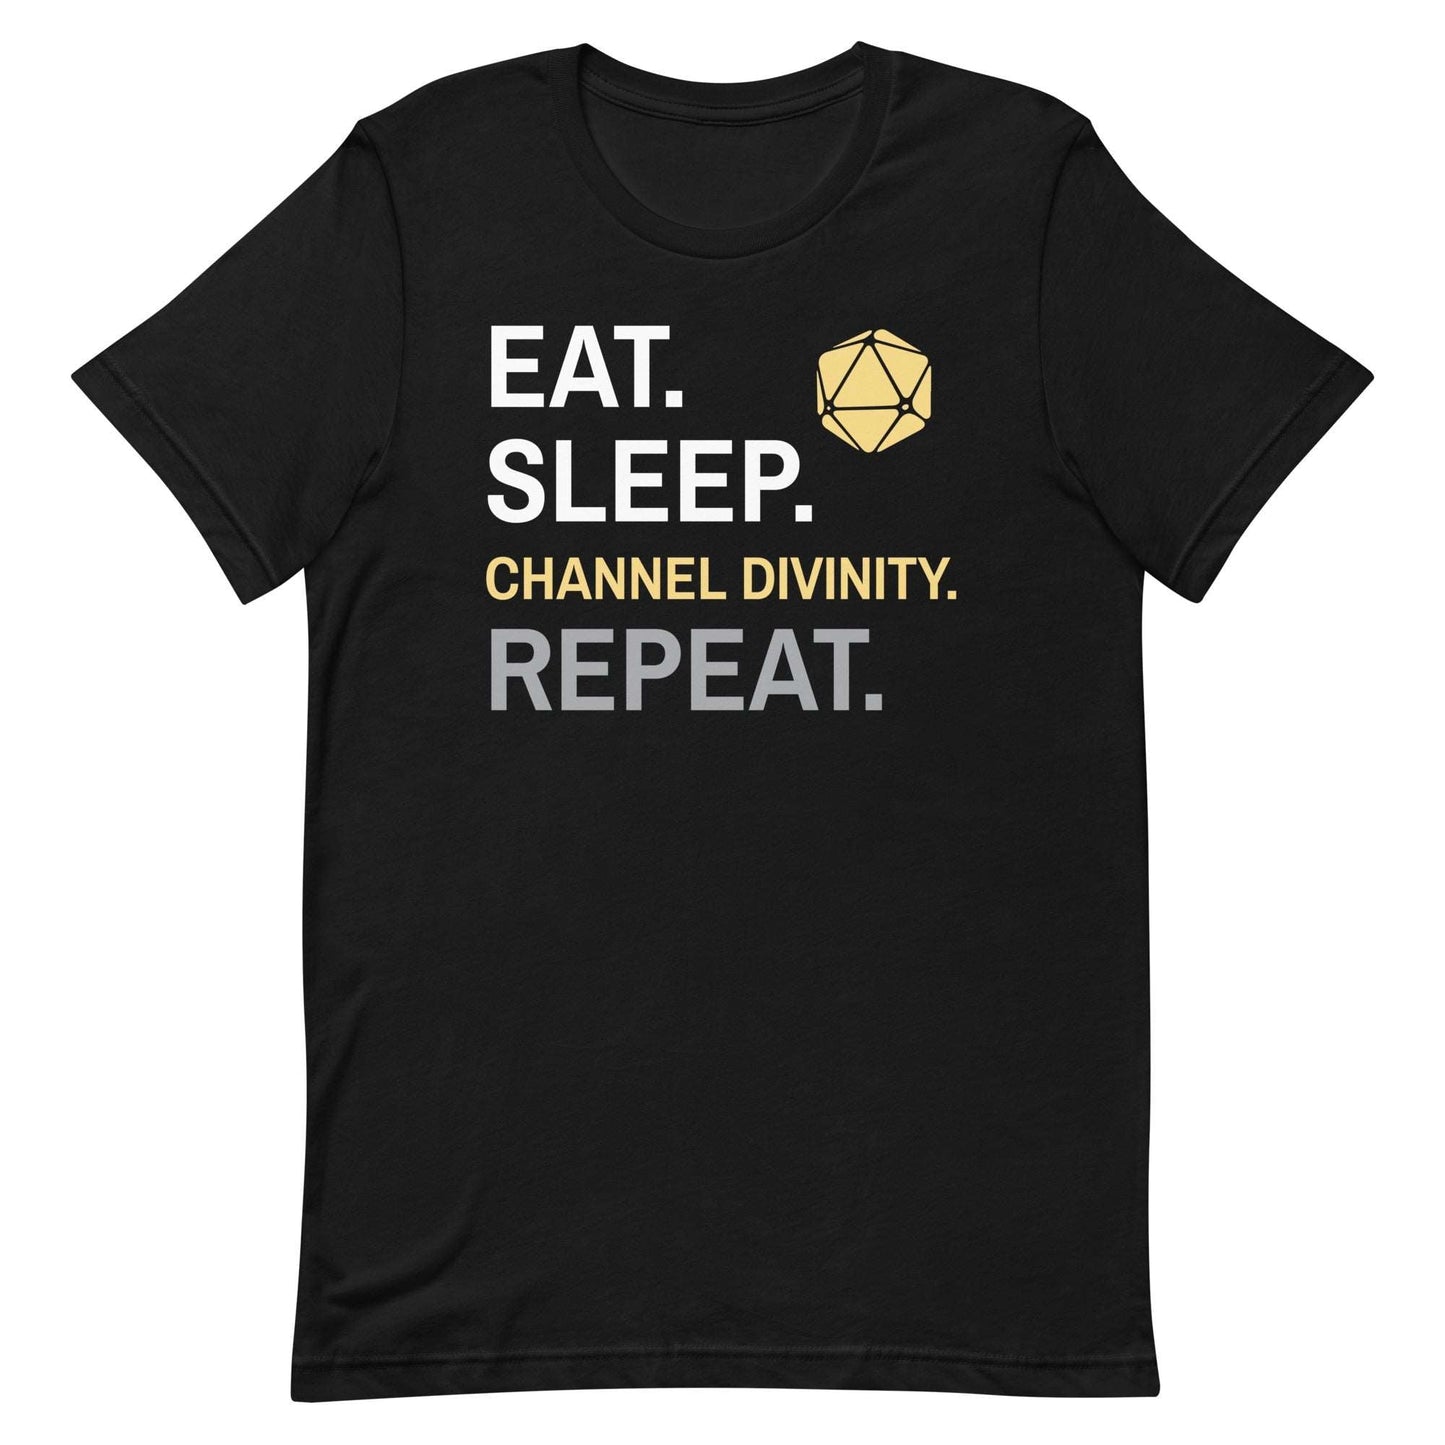 Cleric Class T-Shirt – 'Eat, Sleep, Channel Divinity, Repeat' – Dungeons & Dragons Cleric Class Apparel T-Shirt Black / S